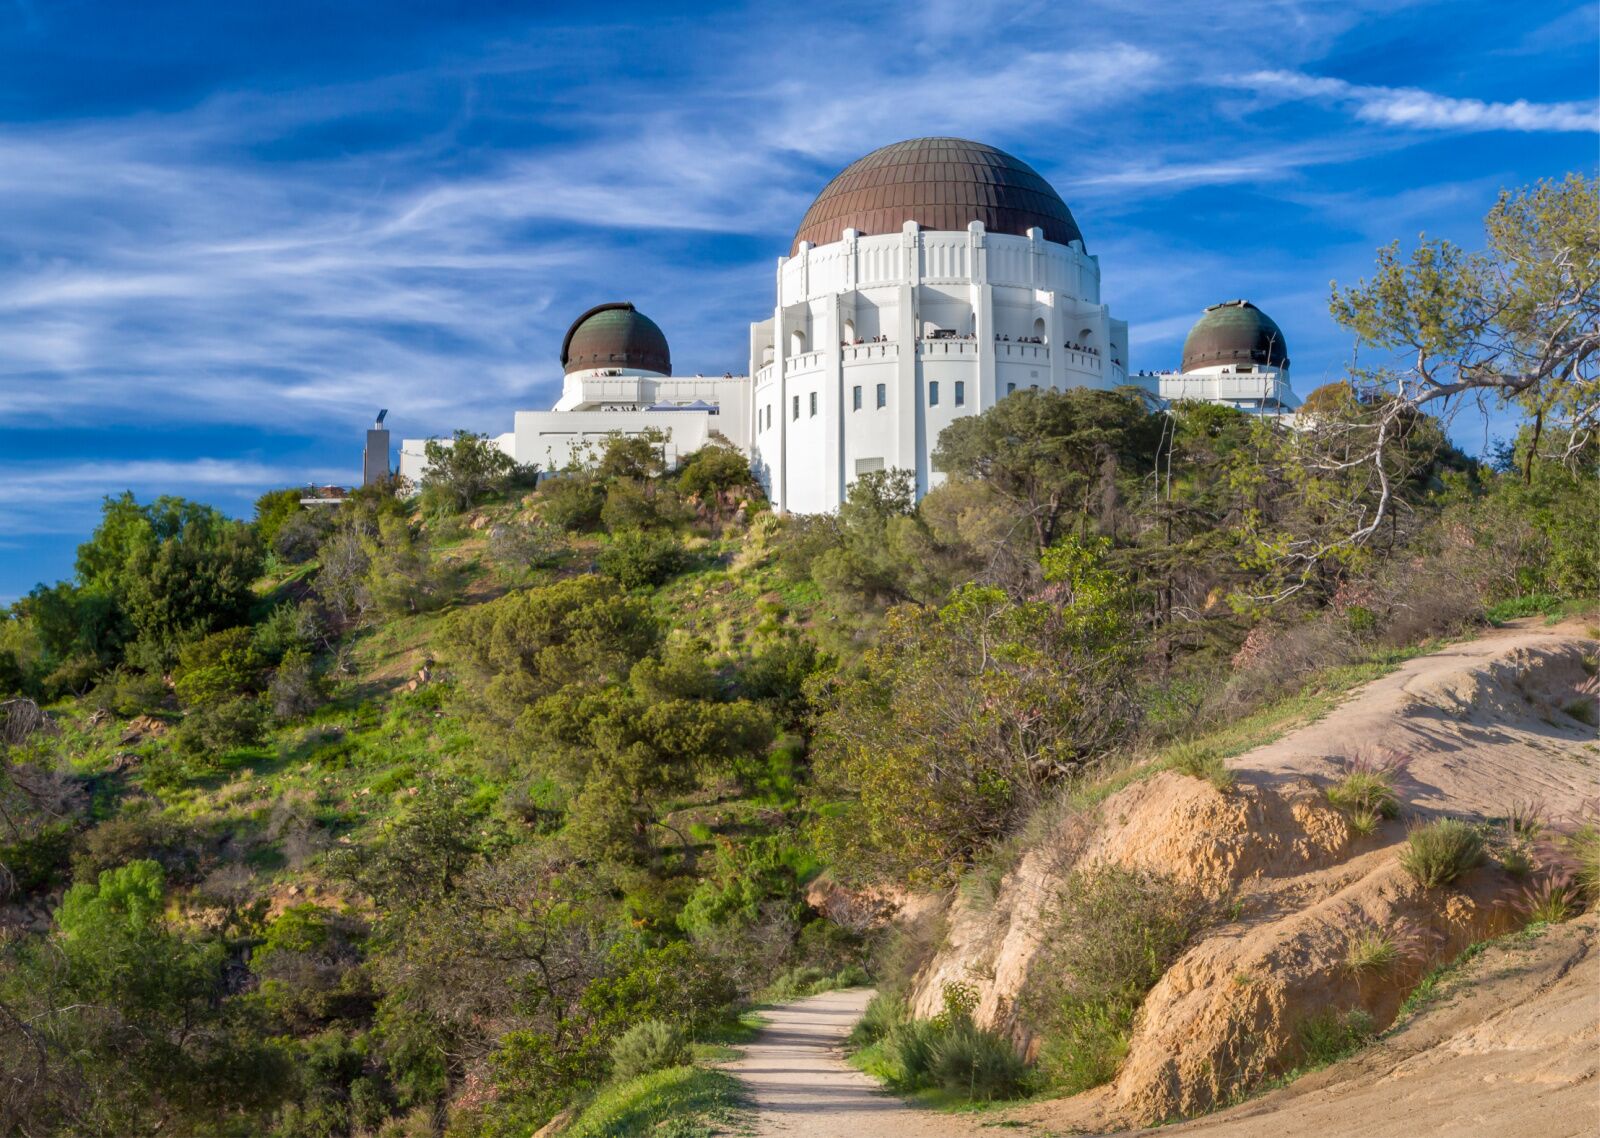 griffith park, one of the best parks in los angeles